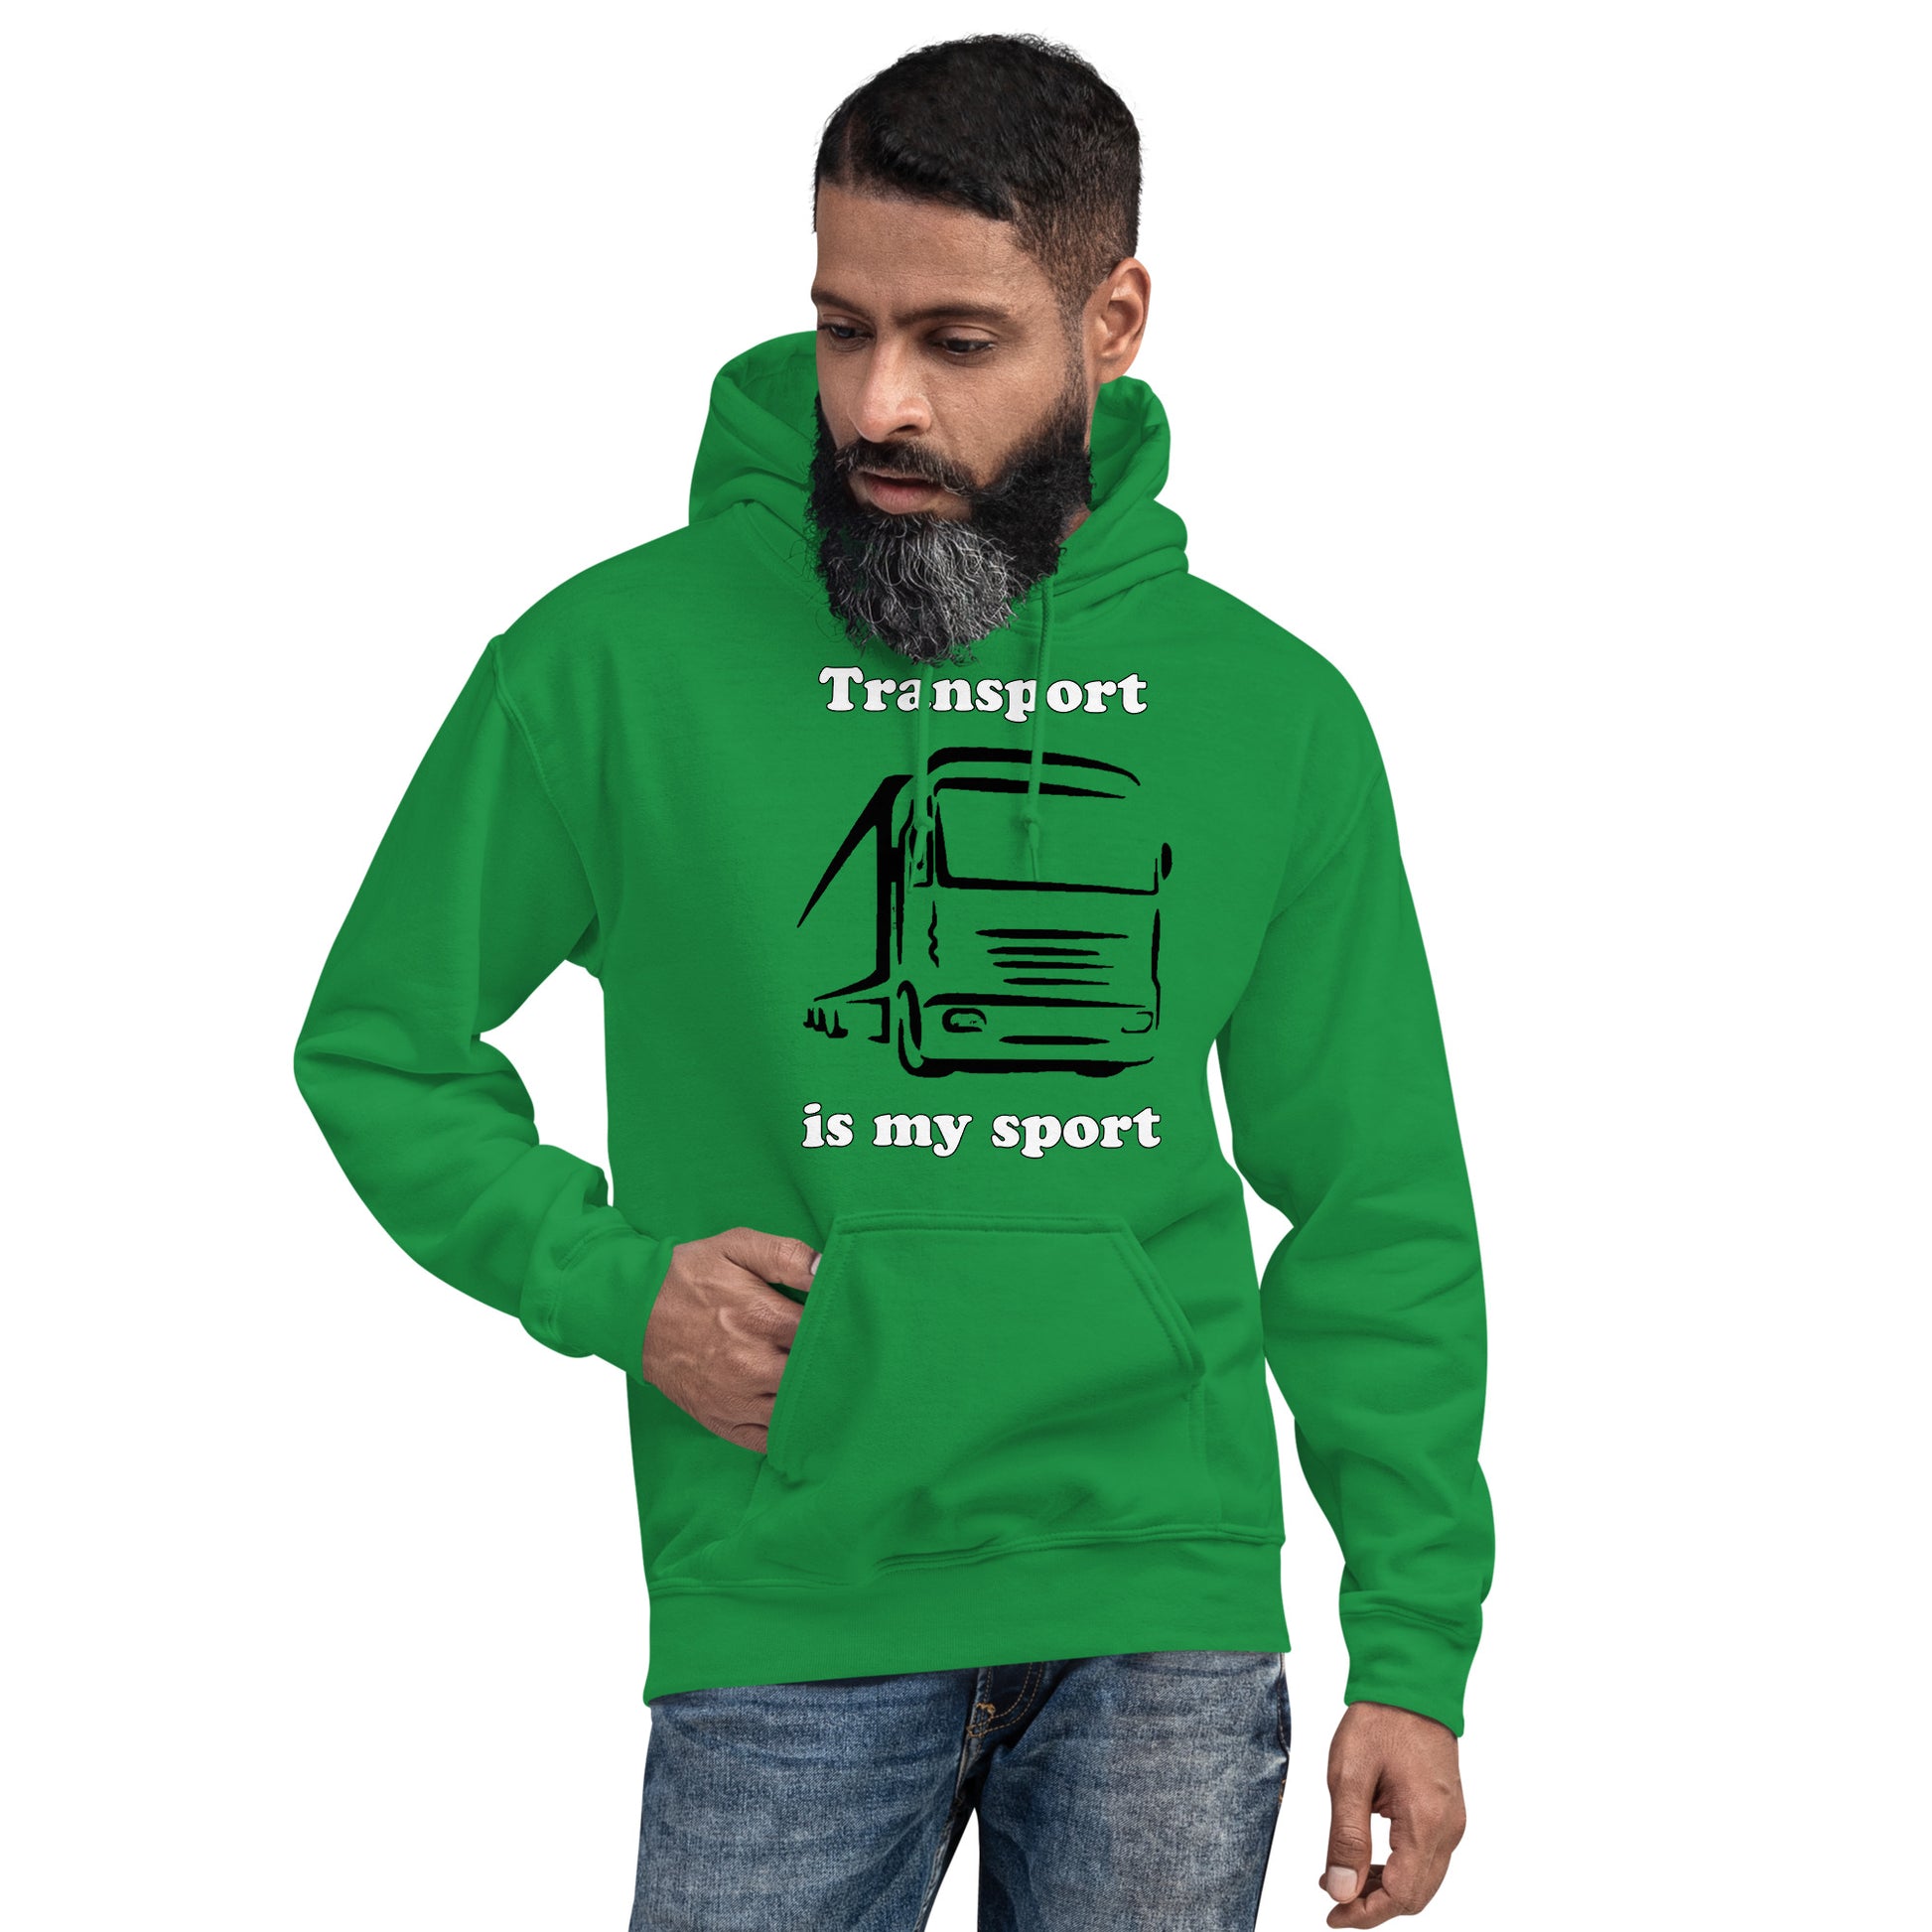 Man with Irish green hoodie with picture of truck and text "Transport is my sport"